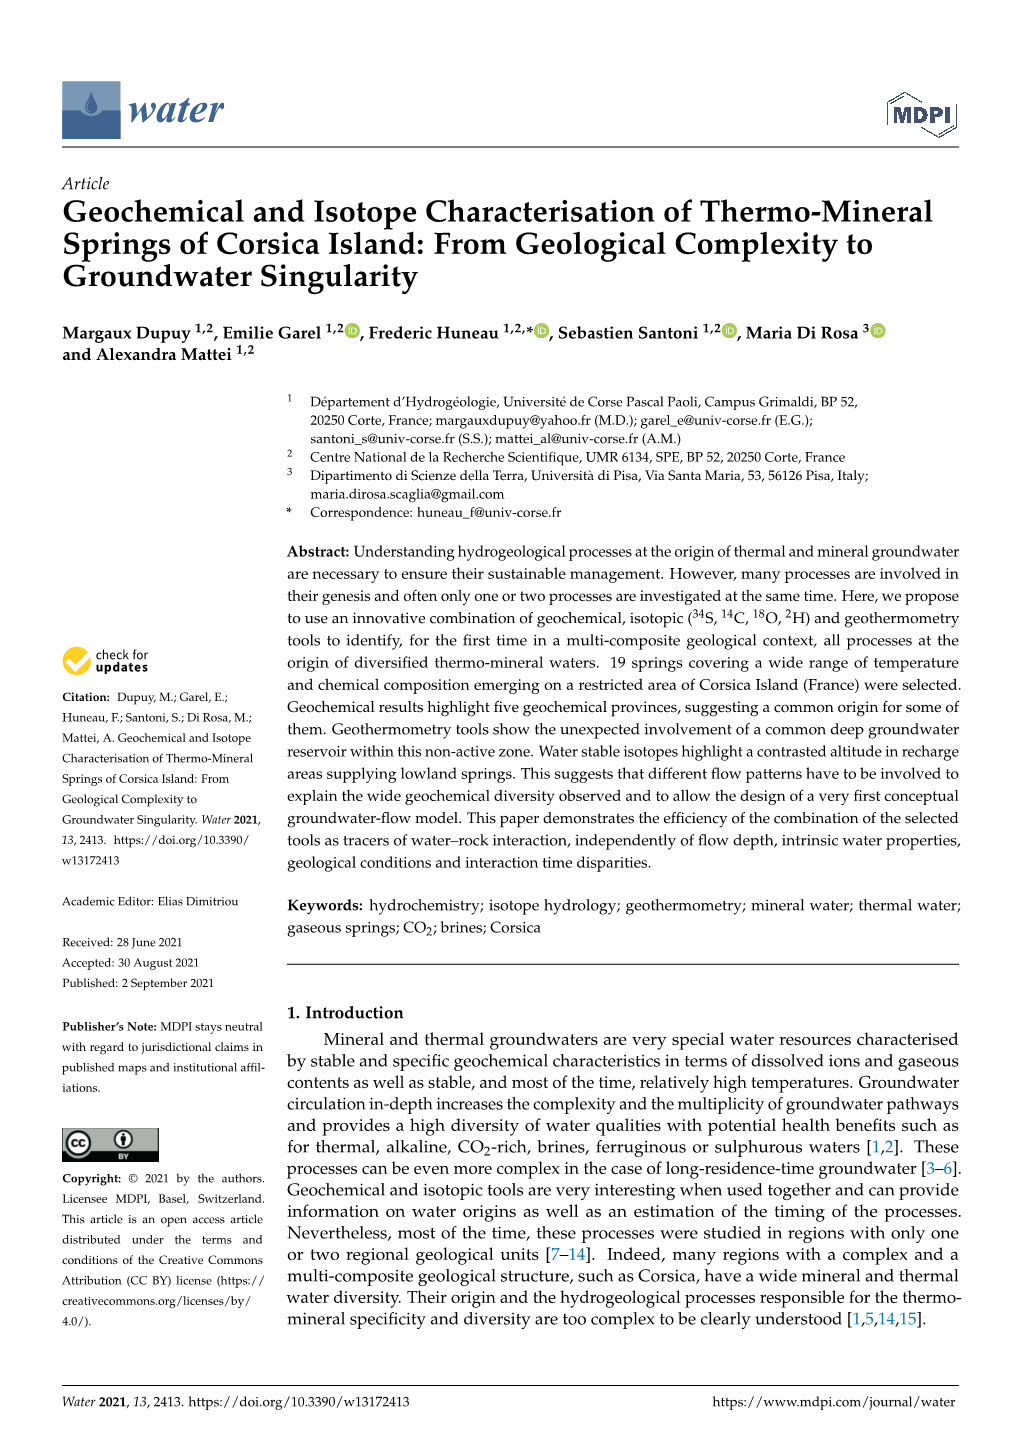 Geochemical and Isotope Characterisation of Thermo-Mineral Springs of Corsica Island: from Geological Complexity to Groundwater Singularity